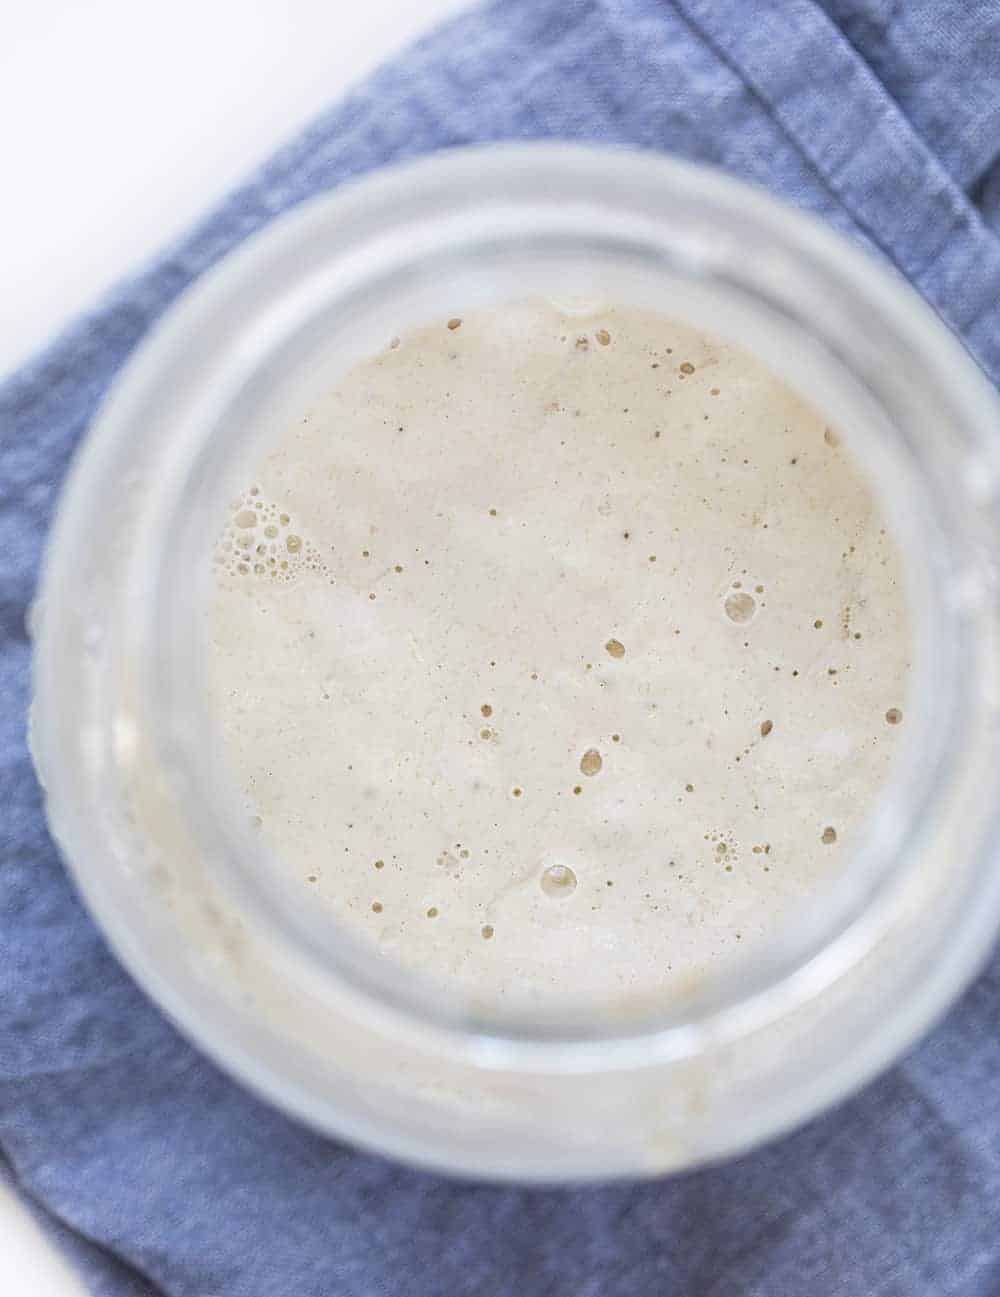 Overhead view of the bubbles in a sourdough starter